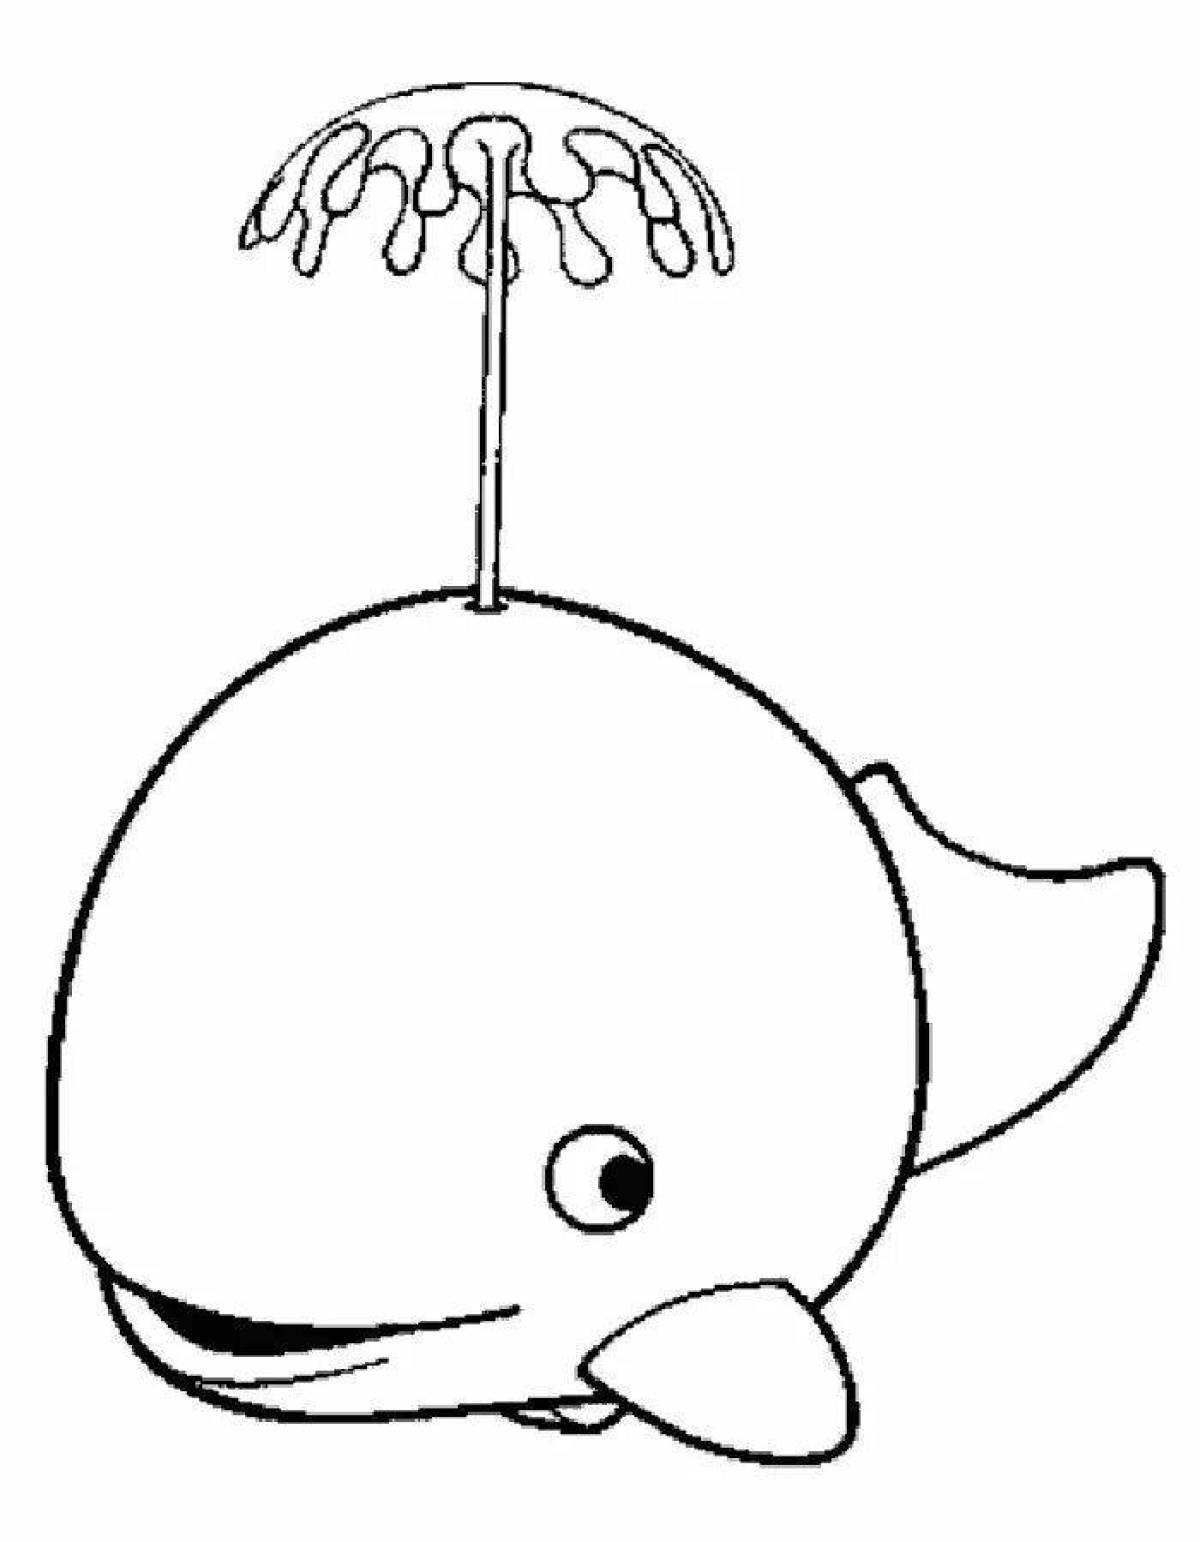 Colorful whale coloring page for kids